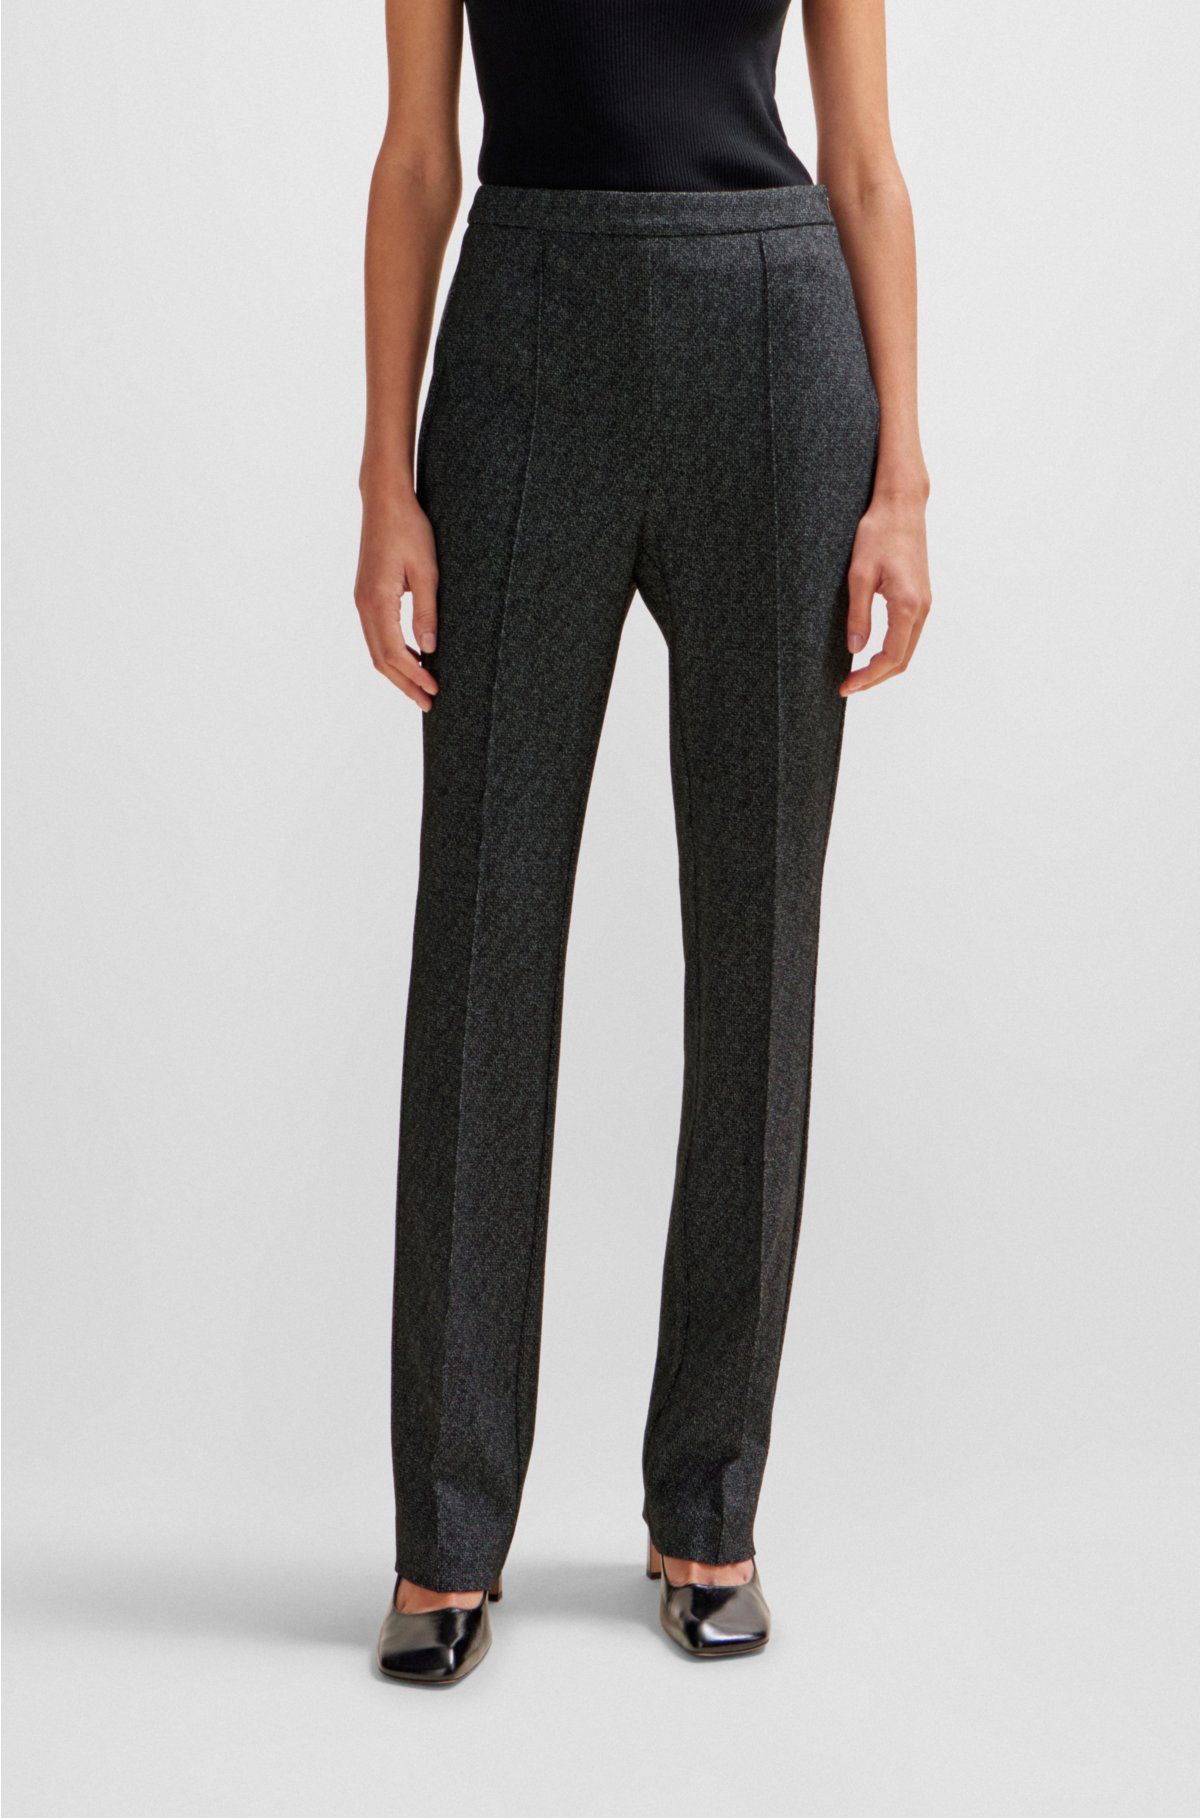 BOSS - Slim-fit high-rise trousers in stretch jersey